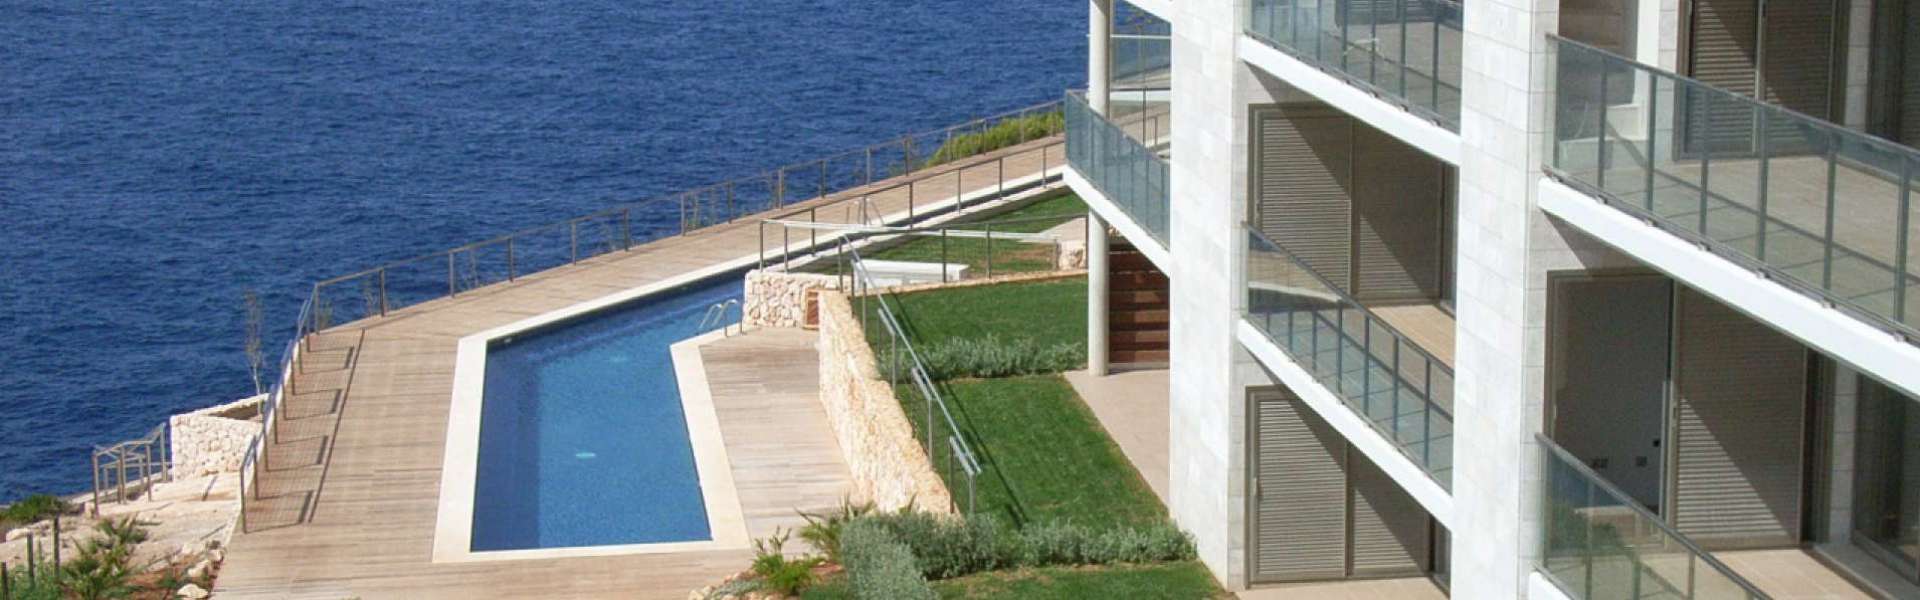 Santanyi/Cala Figuera - Penthouse suite in spectacular location